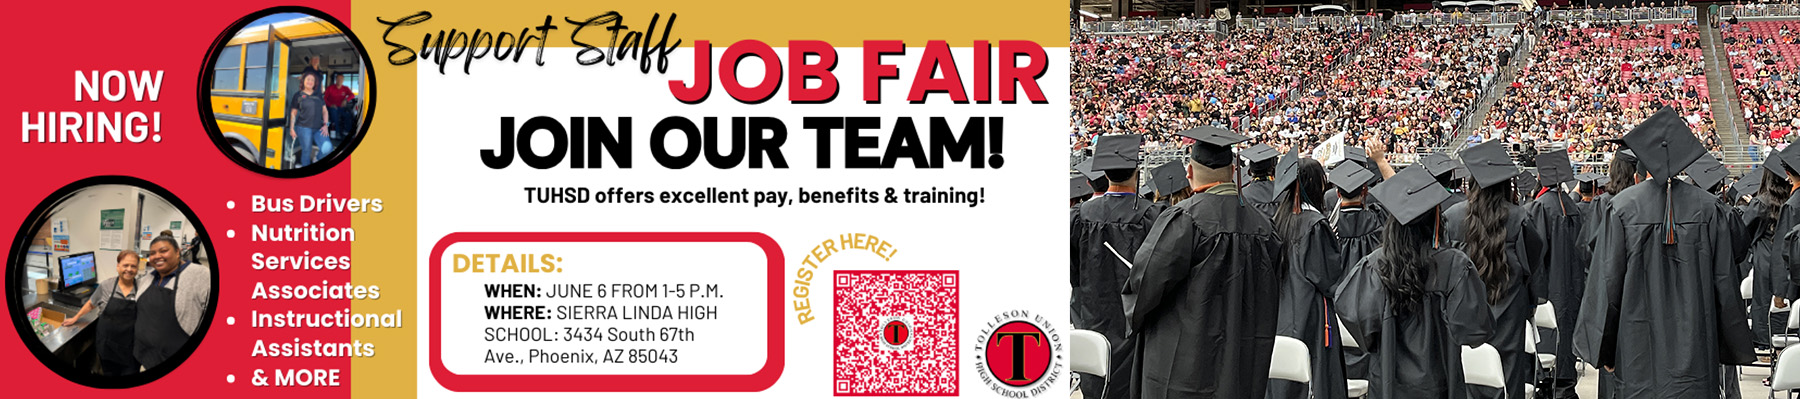 TUHSD Job Fair- we offer excellent pay, benefits, & training! Hiring bus drivers, nutrition services associates, instructional assistants & more. June 6 from 1-5 pm at Sierra Linda HS in Phoenix, AZ 85043 | group selfie